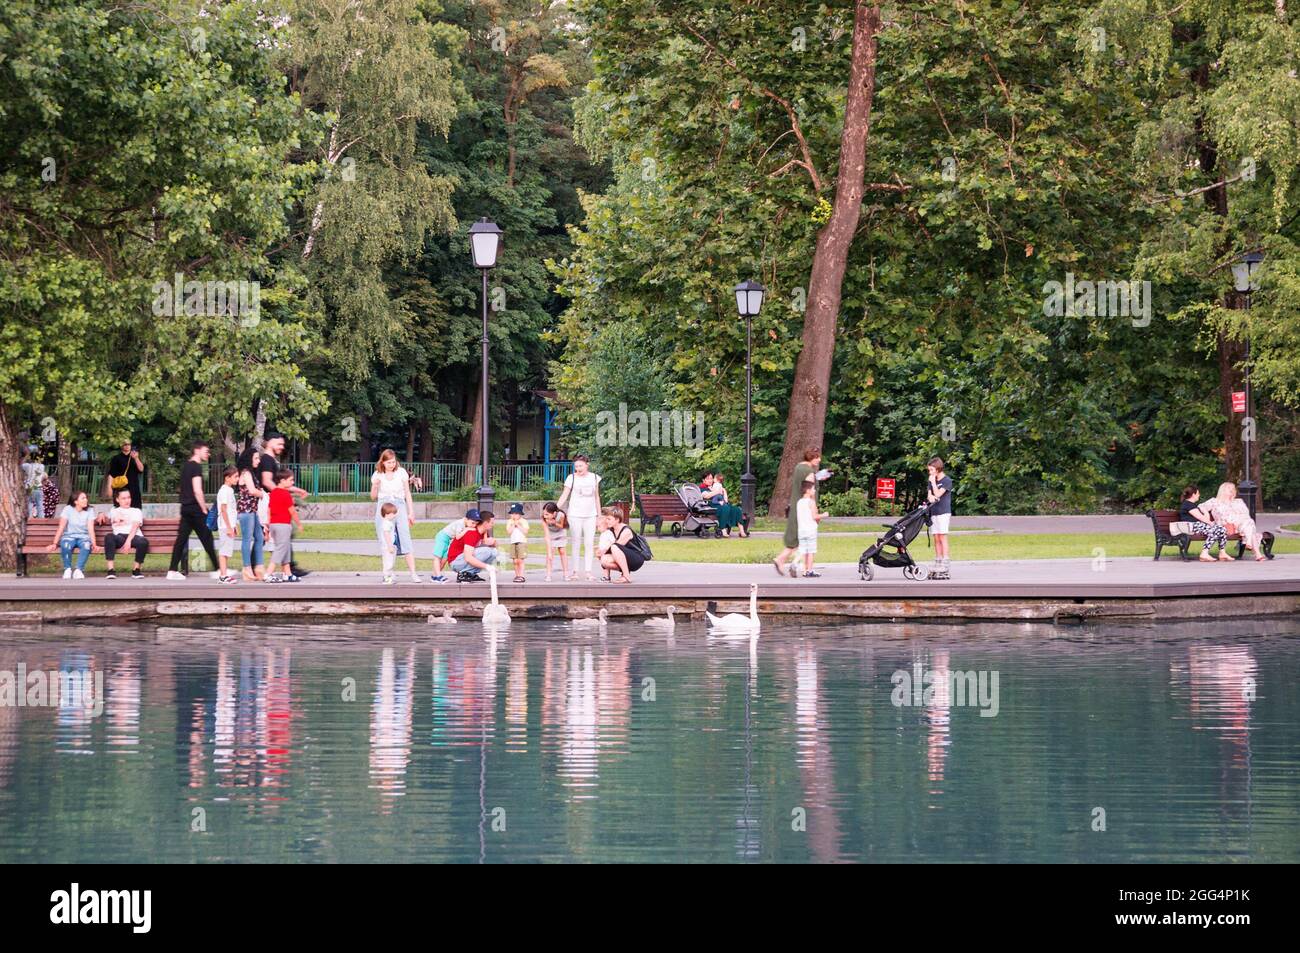 VLADIKAVKAZ, RUSSIA - 07 16 2021: People walking, having rest, feeding swans on the bank of the pond in Kosta Khetagurov Park in the heart of Stock Photo